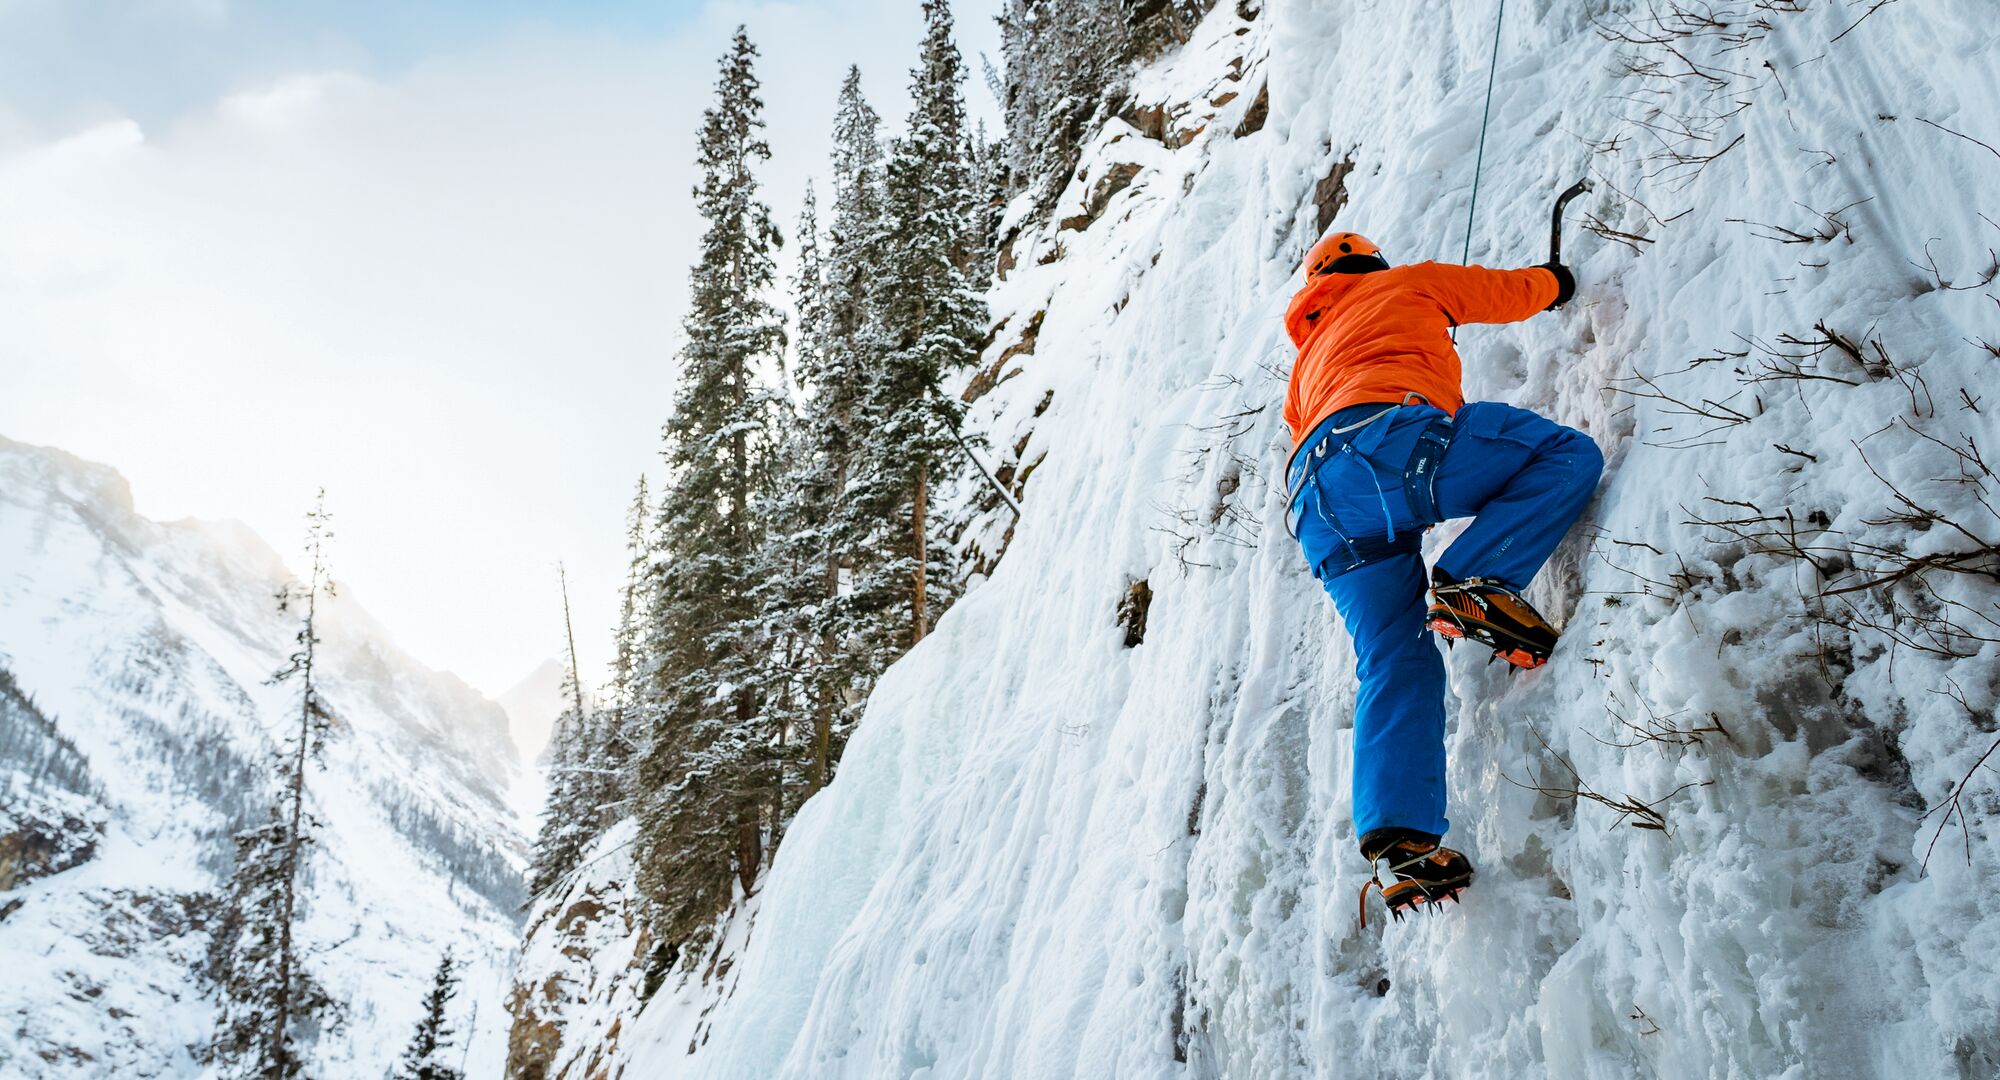 An ice climber travels up a frozen waterfall in Banff National Park